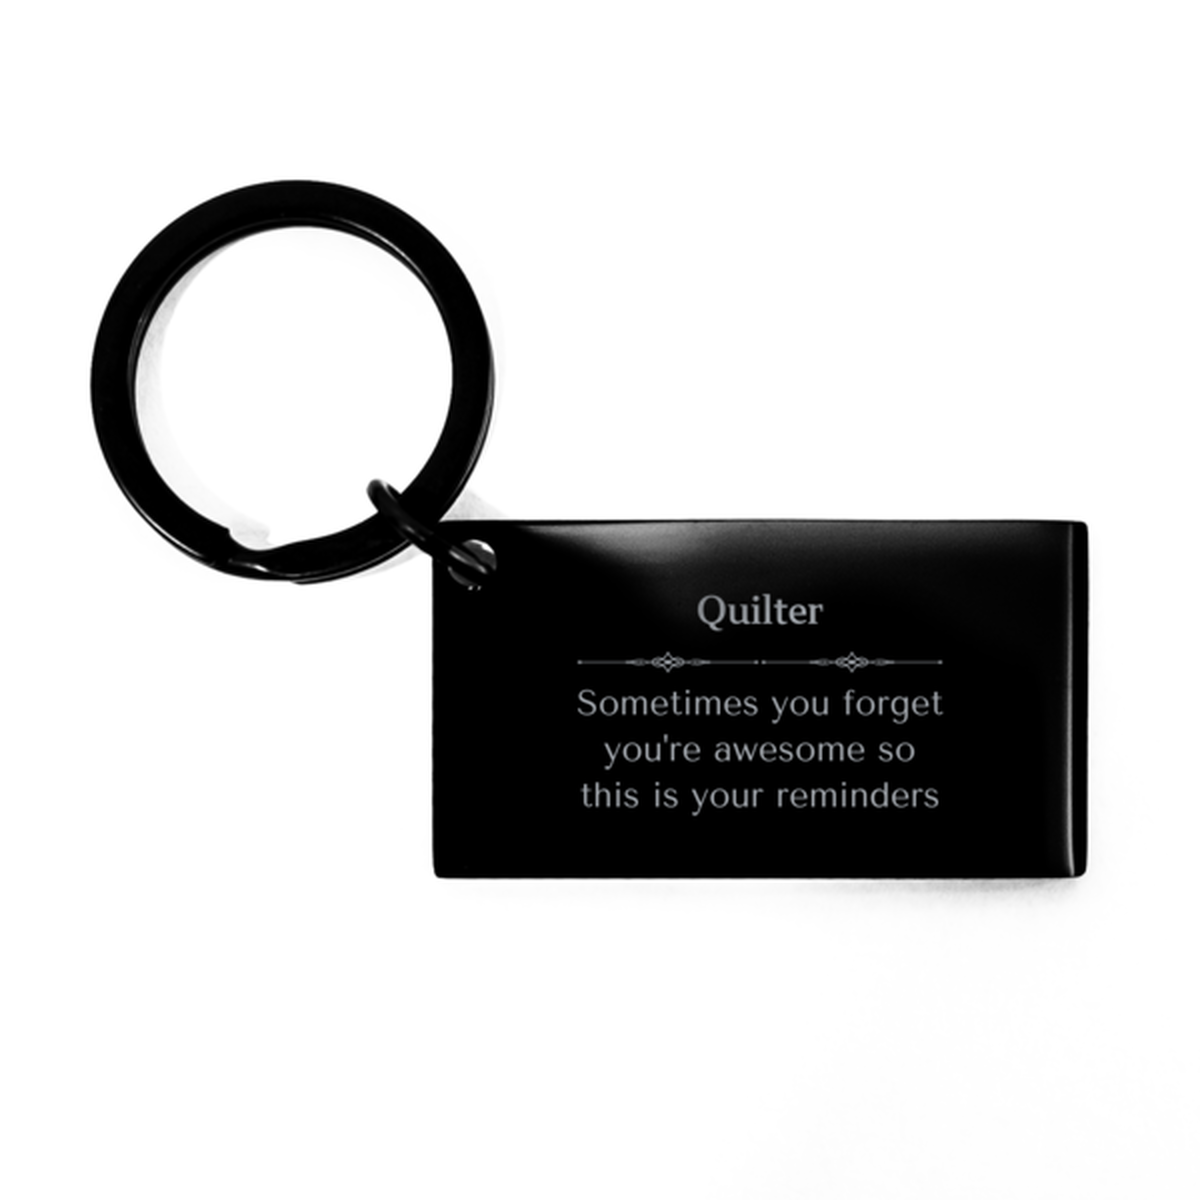 Sentimental Quilter Keychain, Substitute Teacher Sometimes you forget you're awesome so this is your reminders, Graduation Christmas Birthday Gifts for Quilter, Men, Women, Coworkers